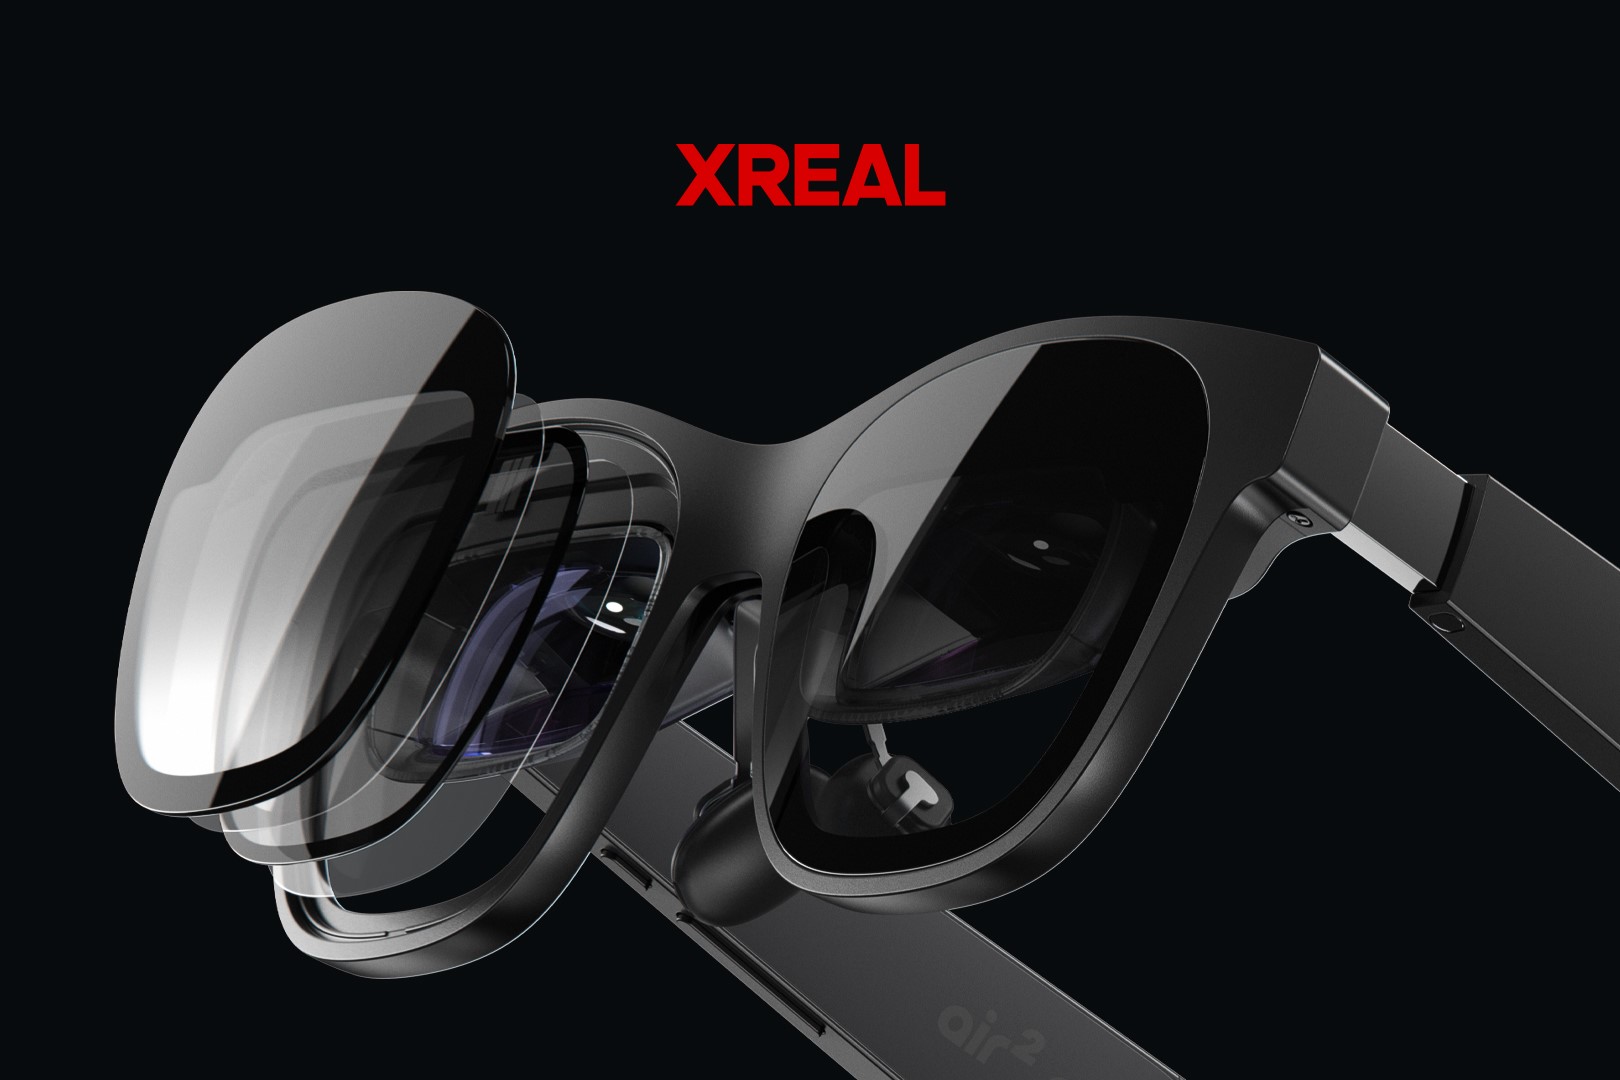 Xreal Air 2 Pro Smart AR Glasses Lightweight 330 inch Giant Screen